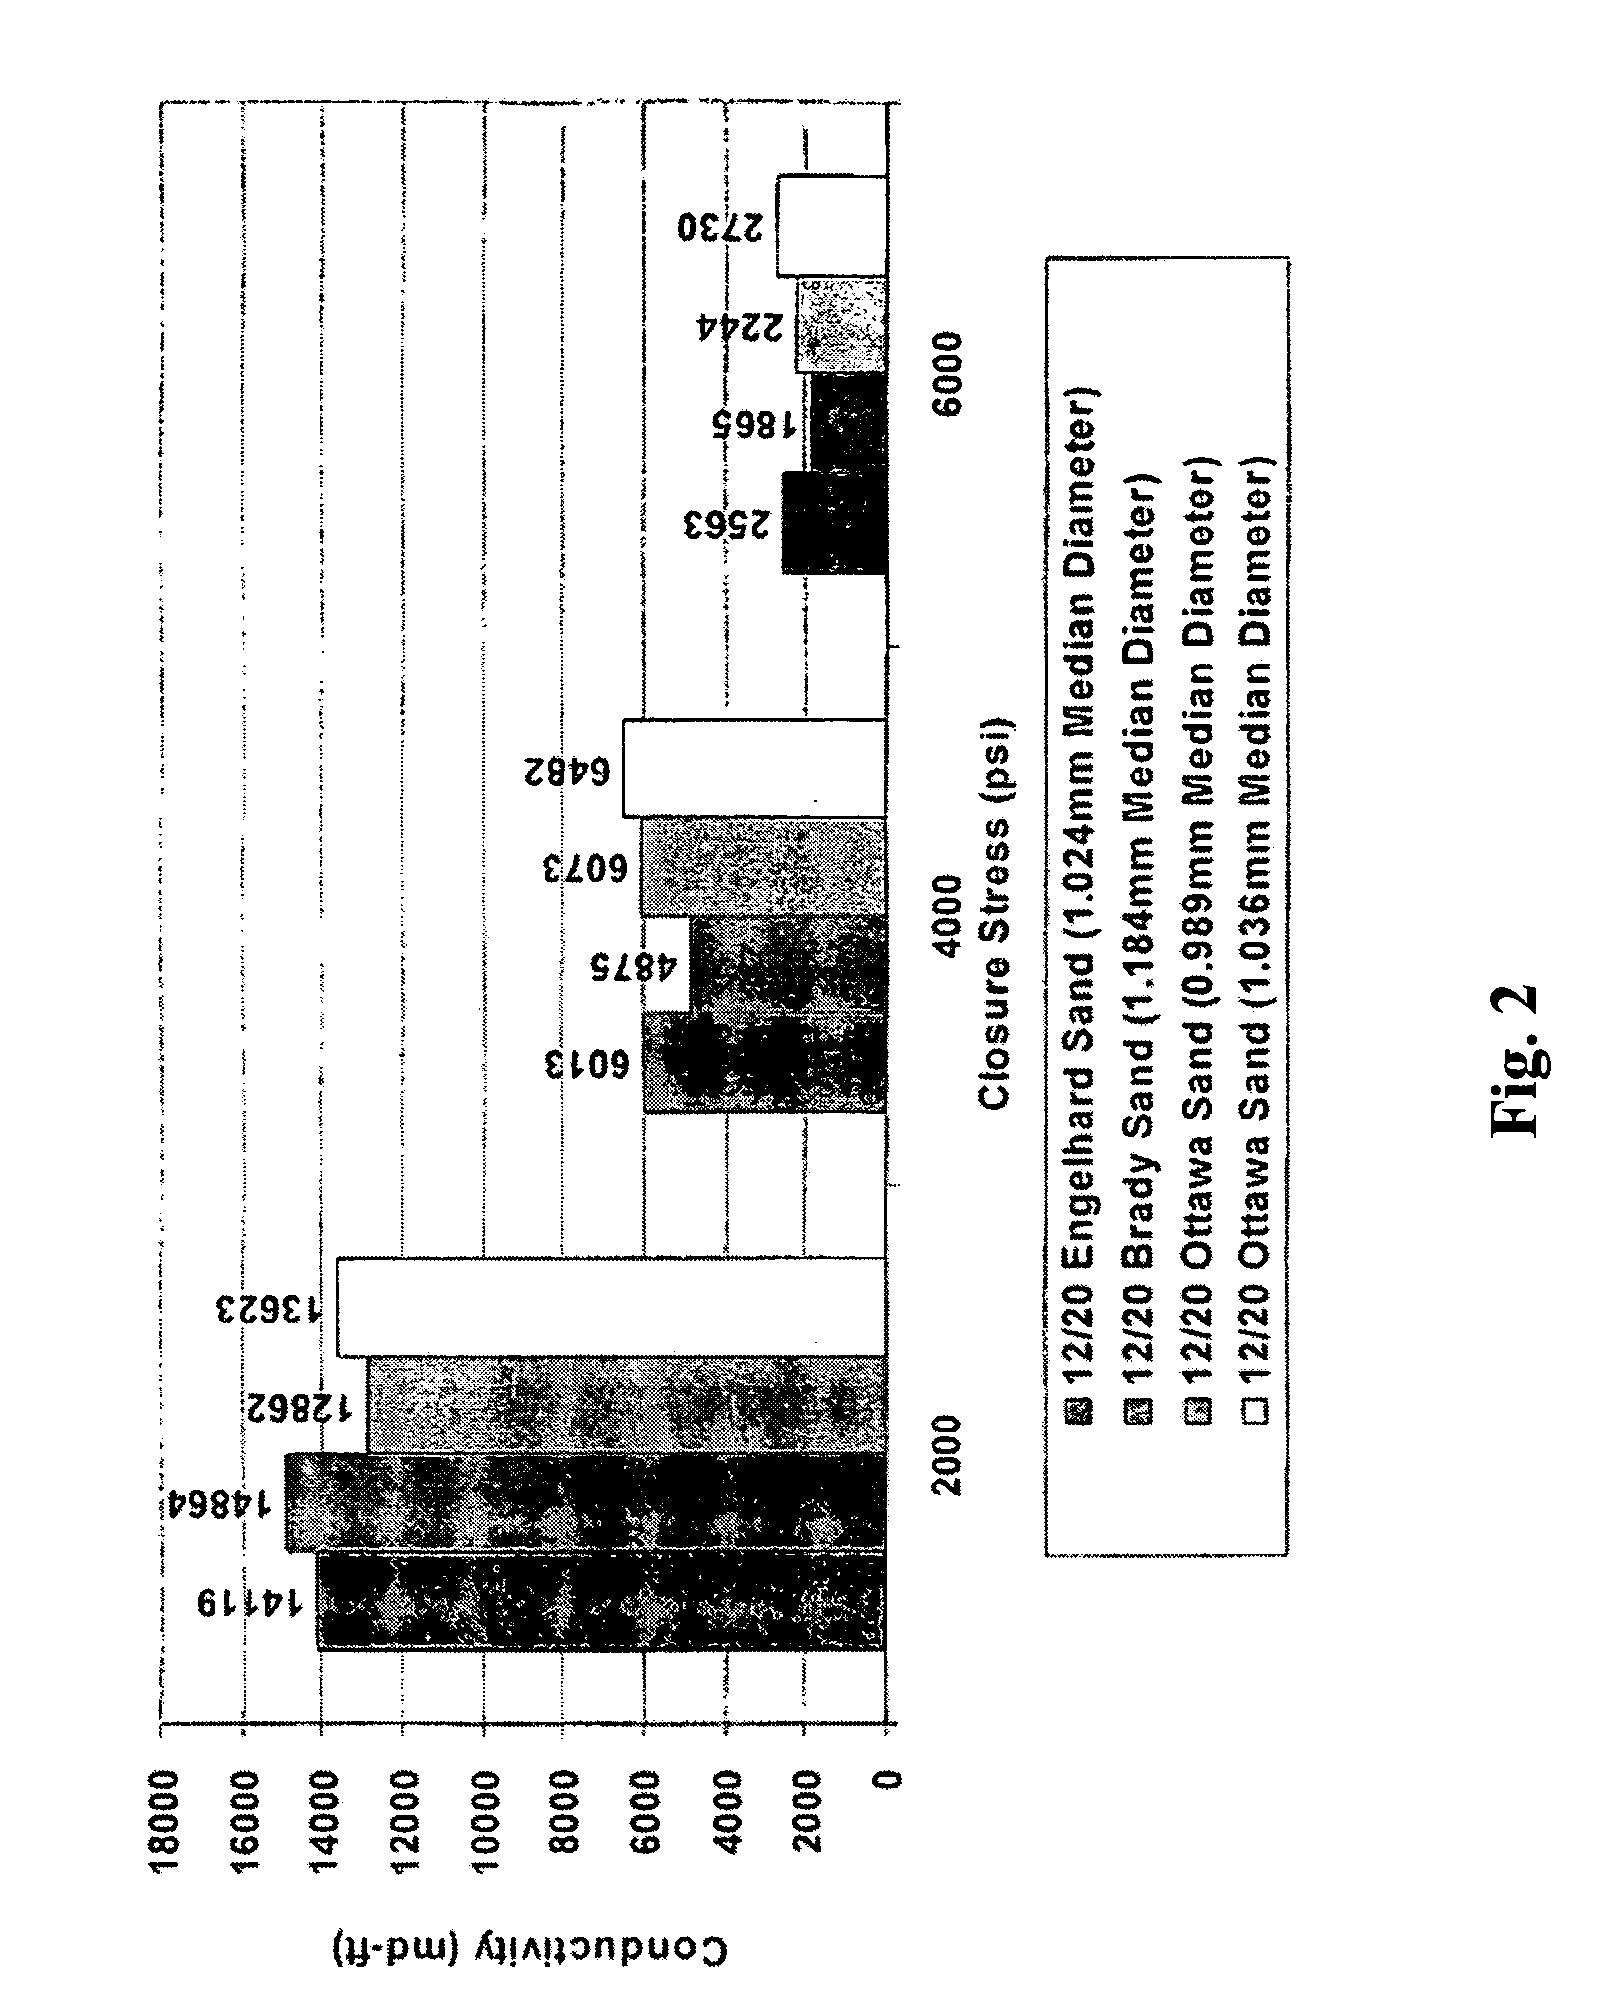 Hydraulic fracturing proppants and methods of use